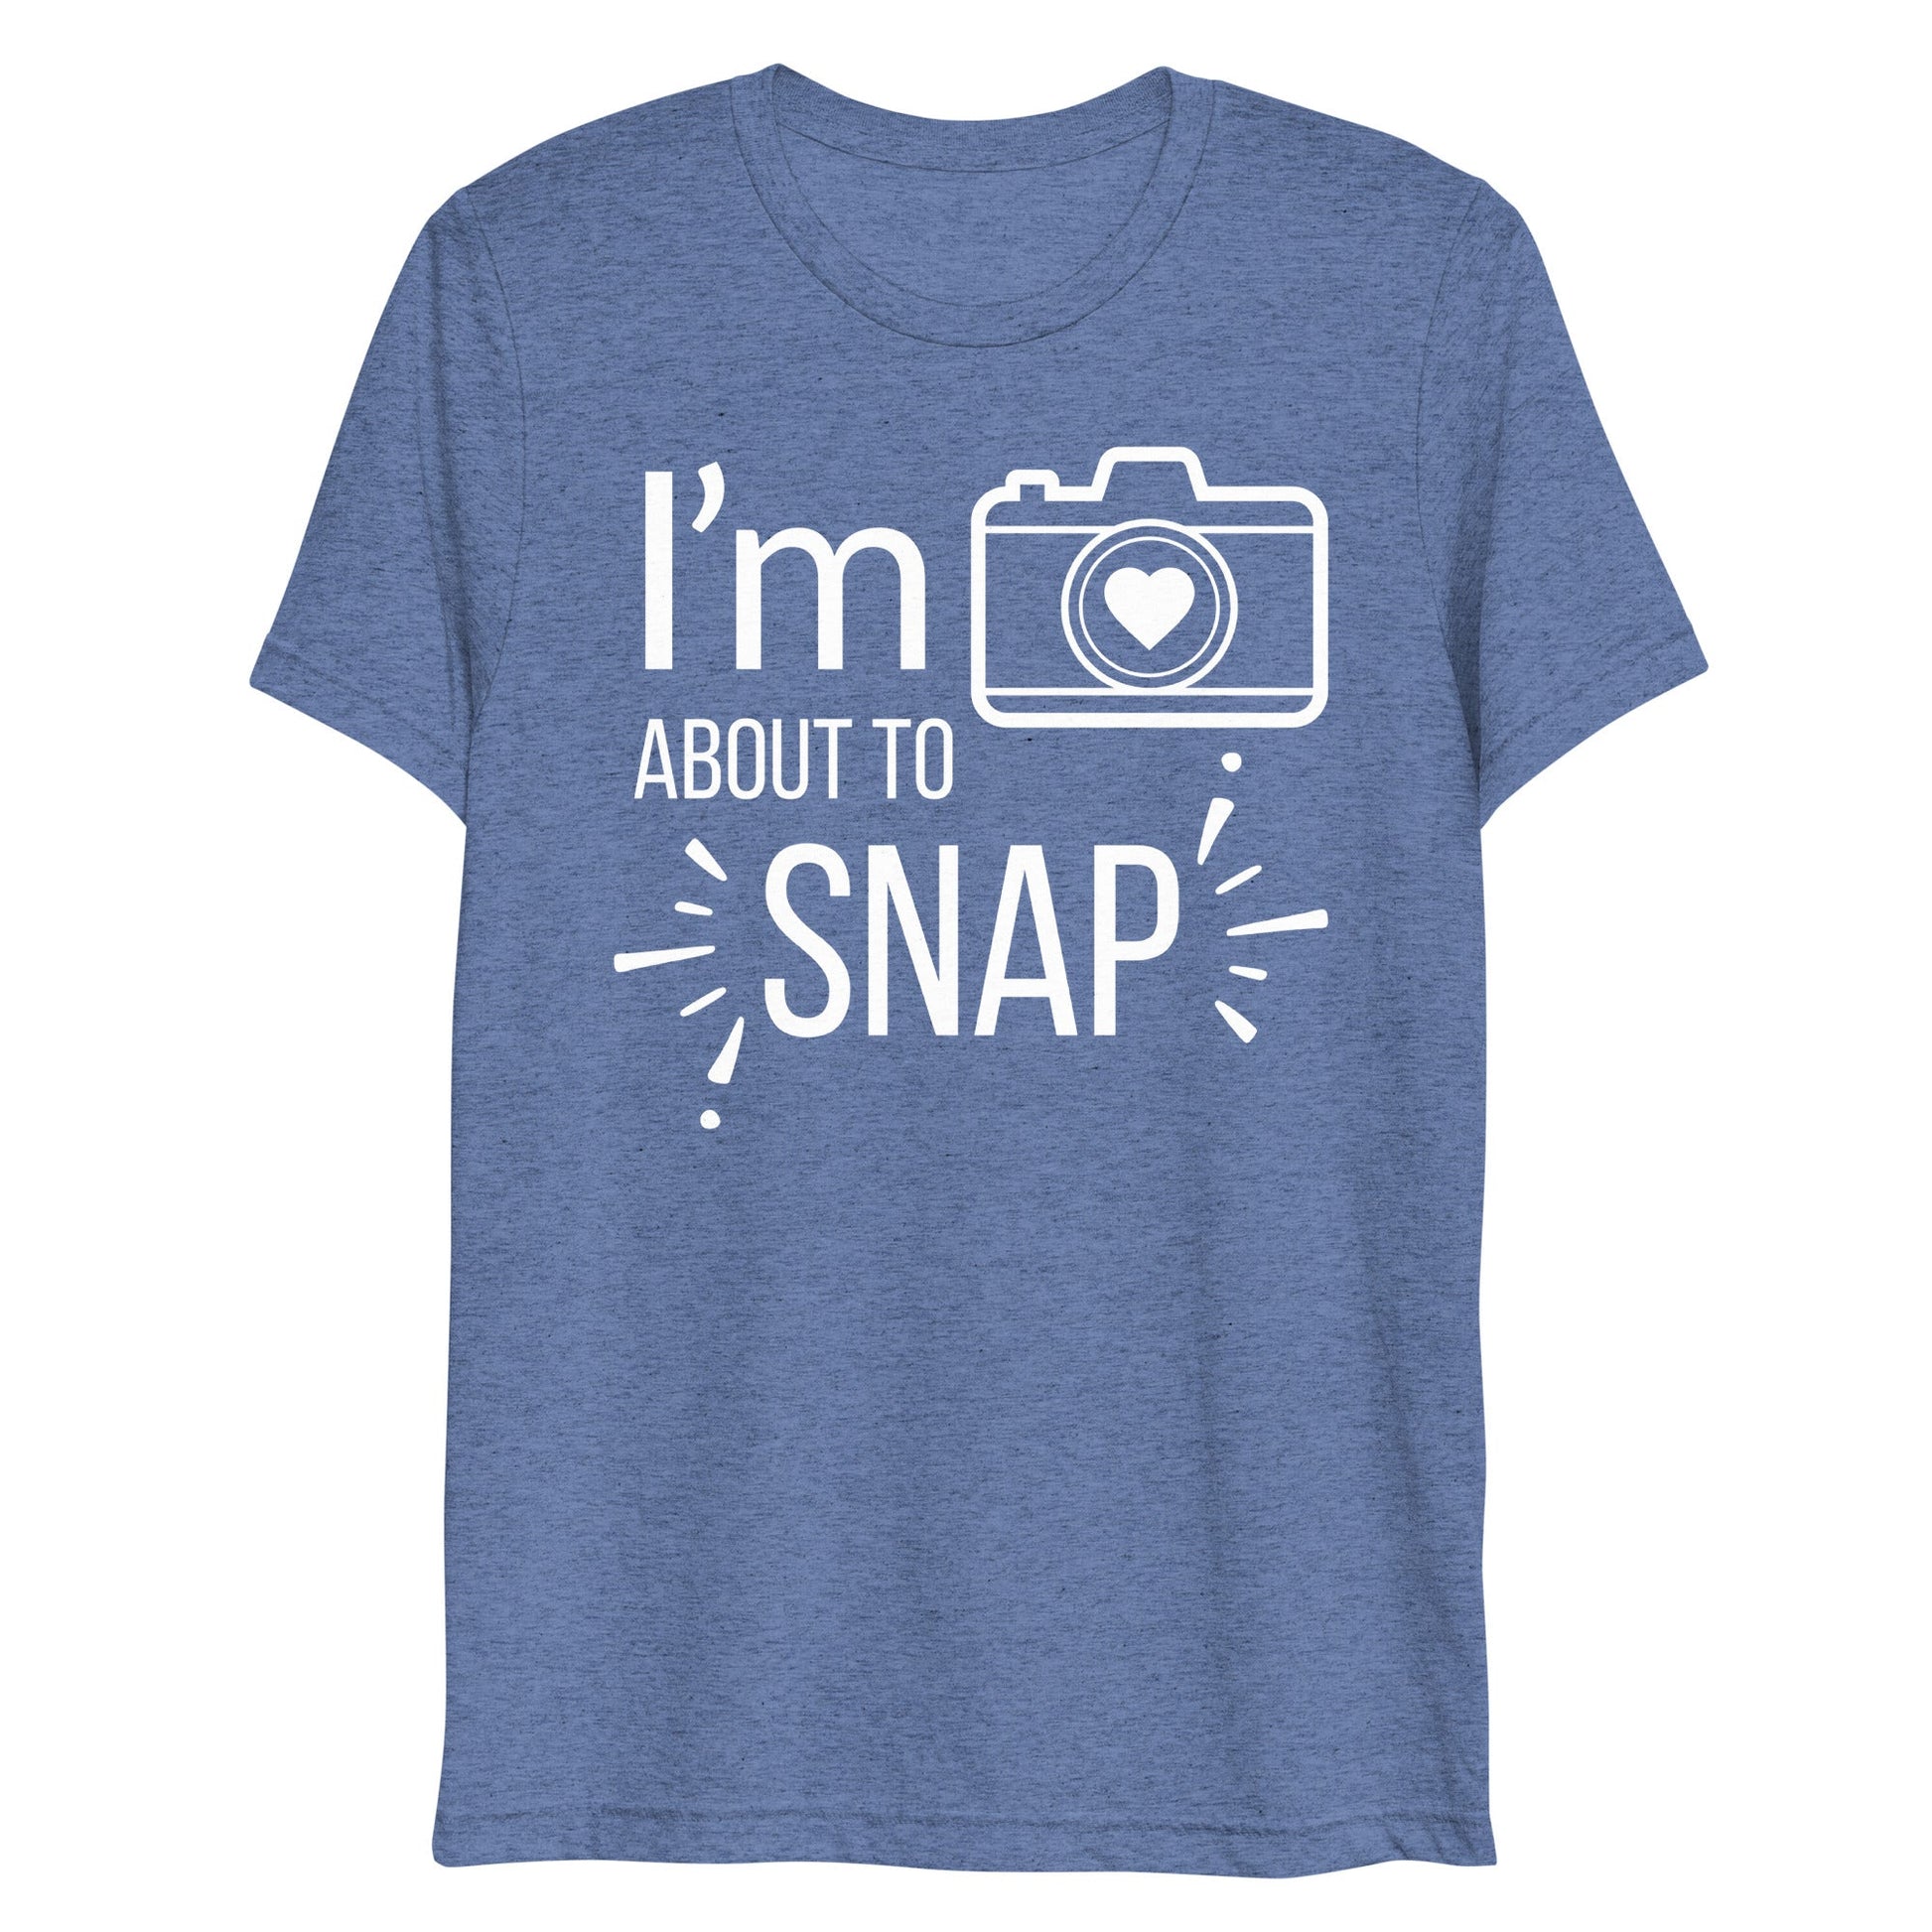 I'm About To Snap Shirt - Photography Shirt - Photographer Shirt - Gifts for Photographers - Women's Tees - Funny Shirt - ShopJeanPhotography.com